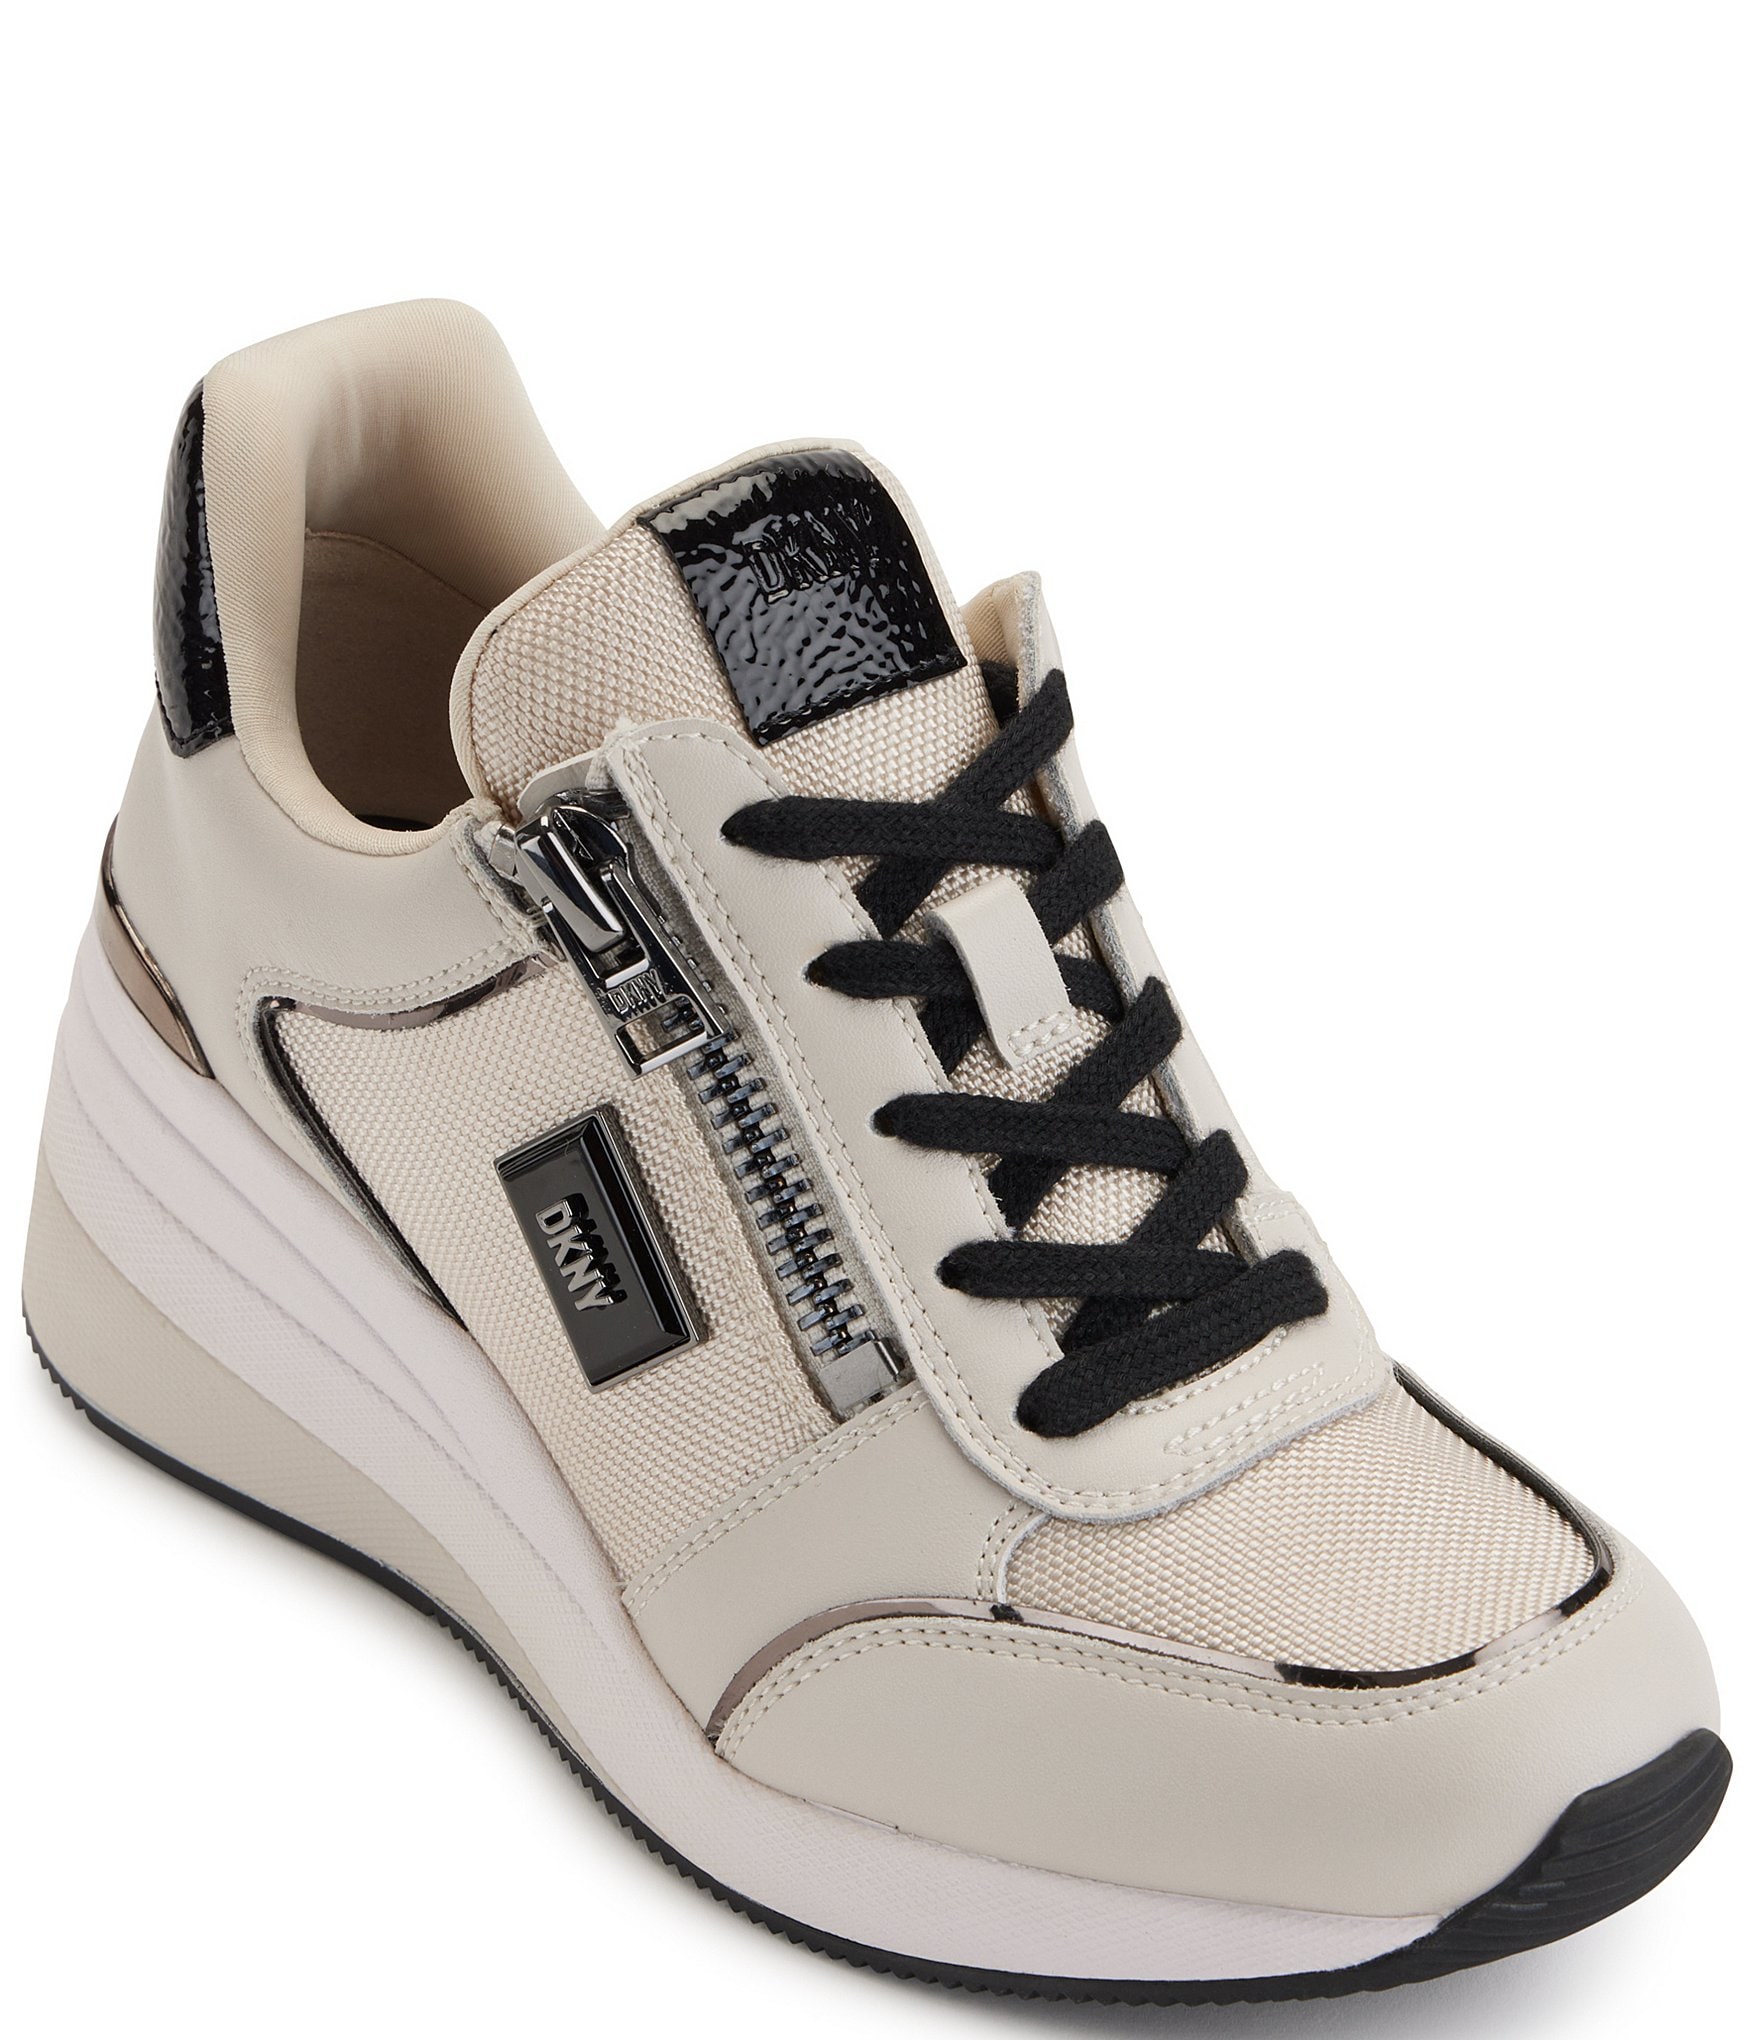 DKNY Kai Leather Lace Up Wedge Sneakers | Dillard's